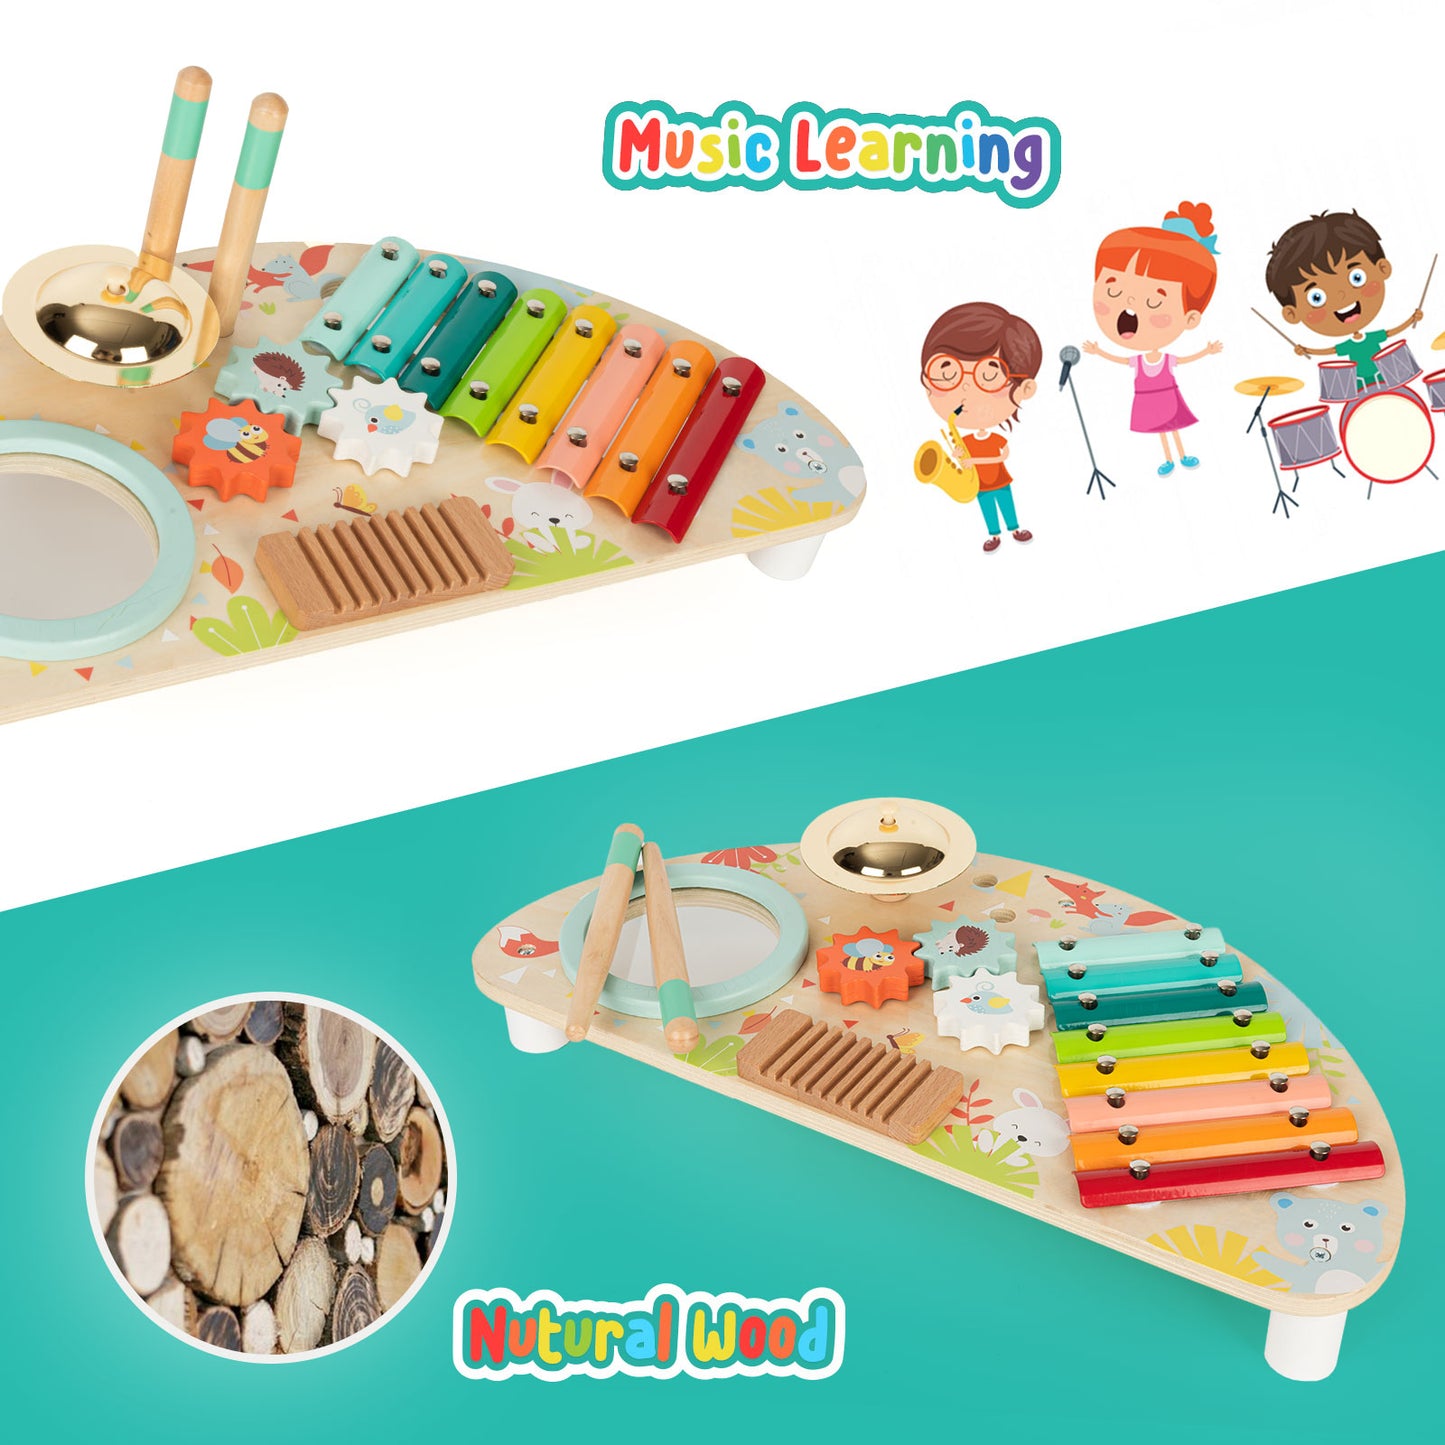 Baby Toys Musical Instruments, All-in-one Musical Toys for Toddlers 1-3 (Includes Xylophone Drum Cymbal Guiro Gears), Wooden Montessori Toys for 1 Year Old Boy & Girl by Rundad